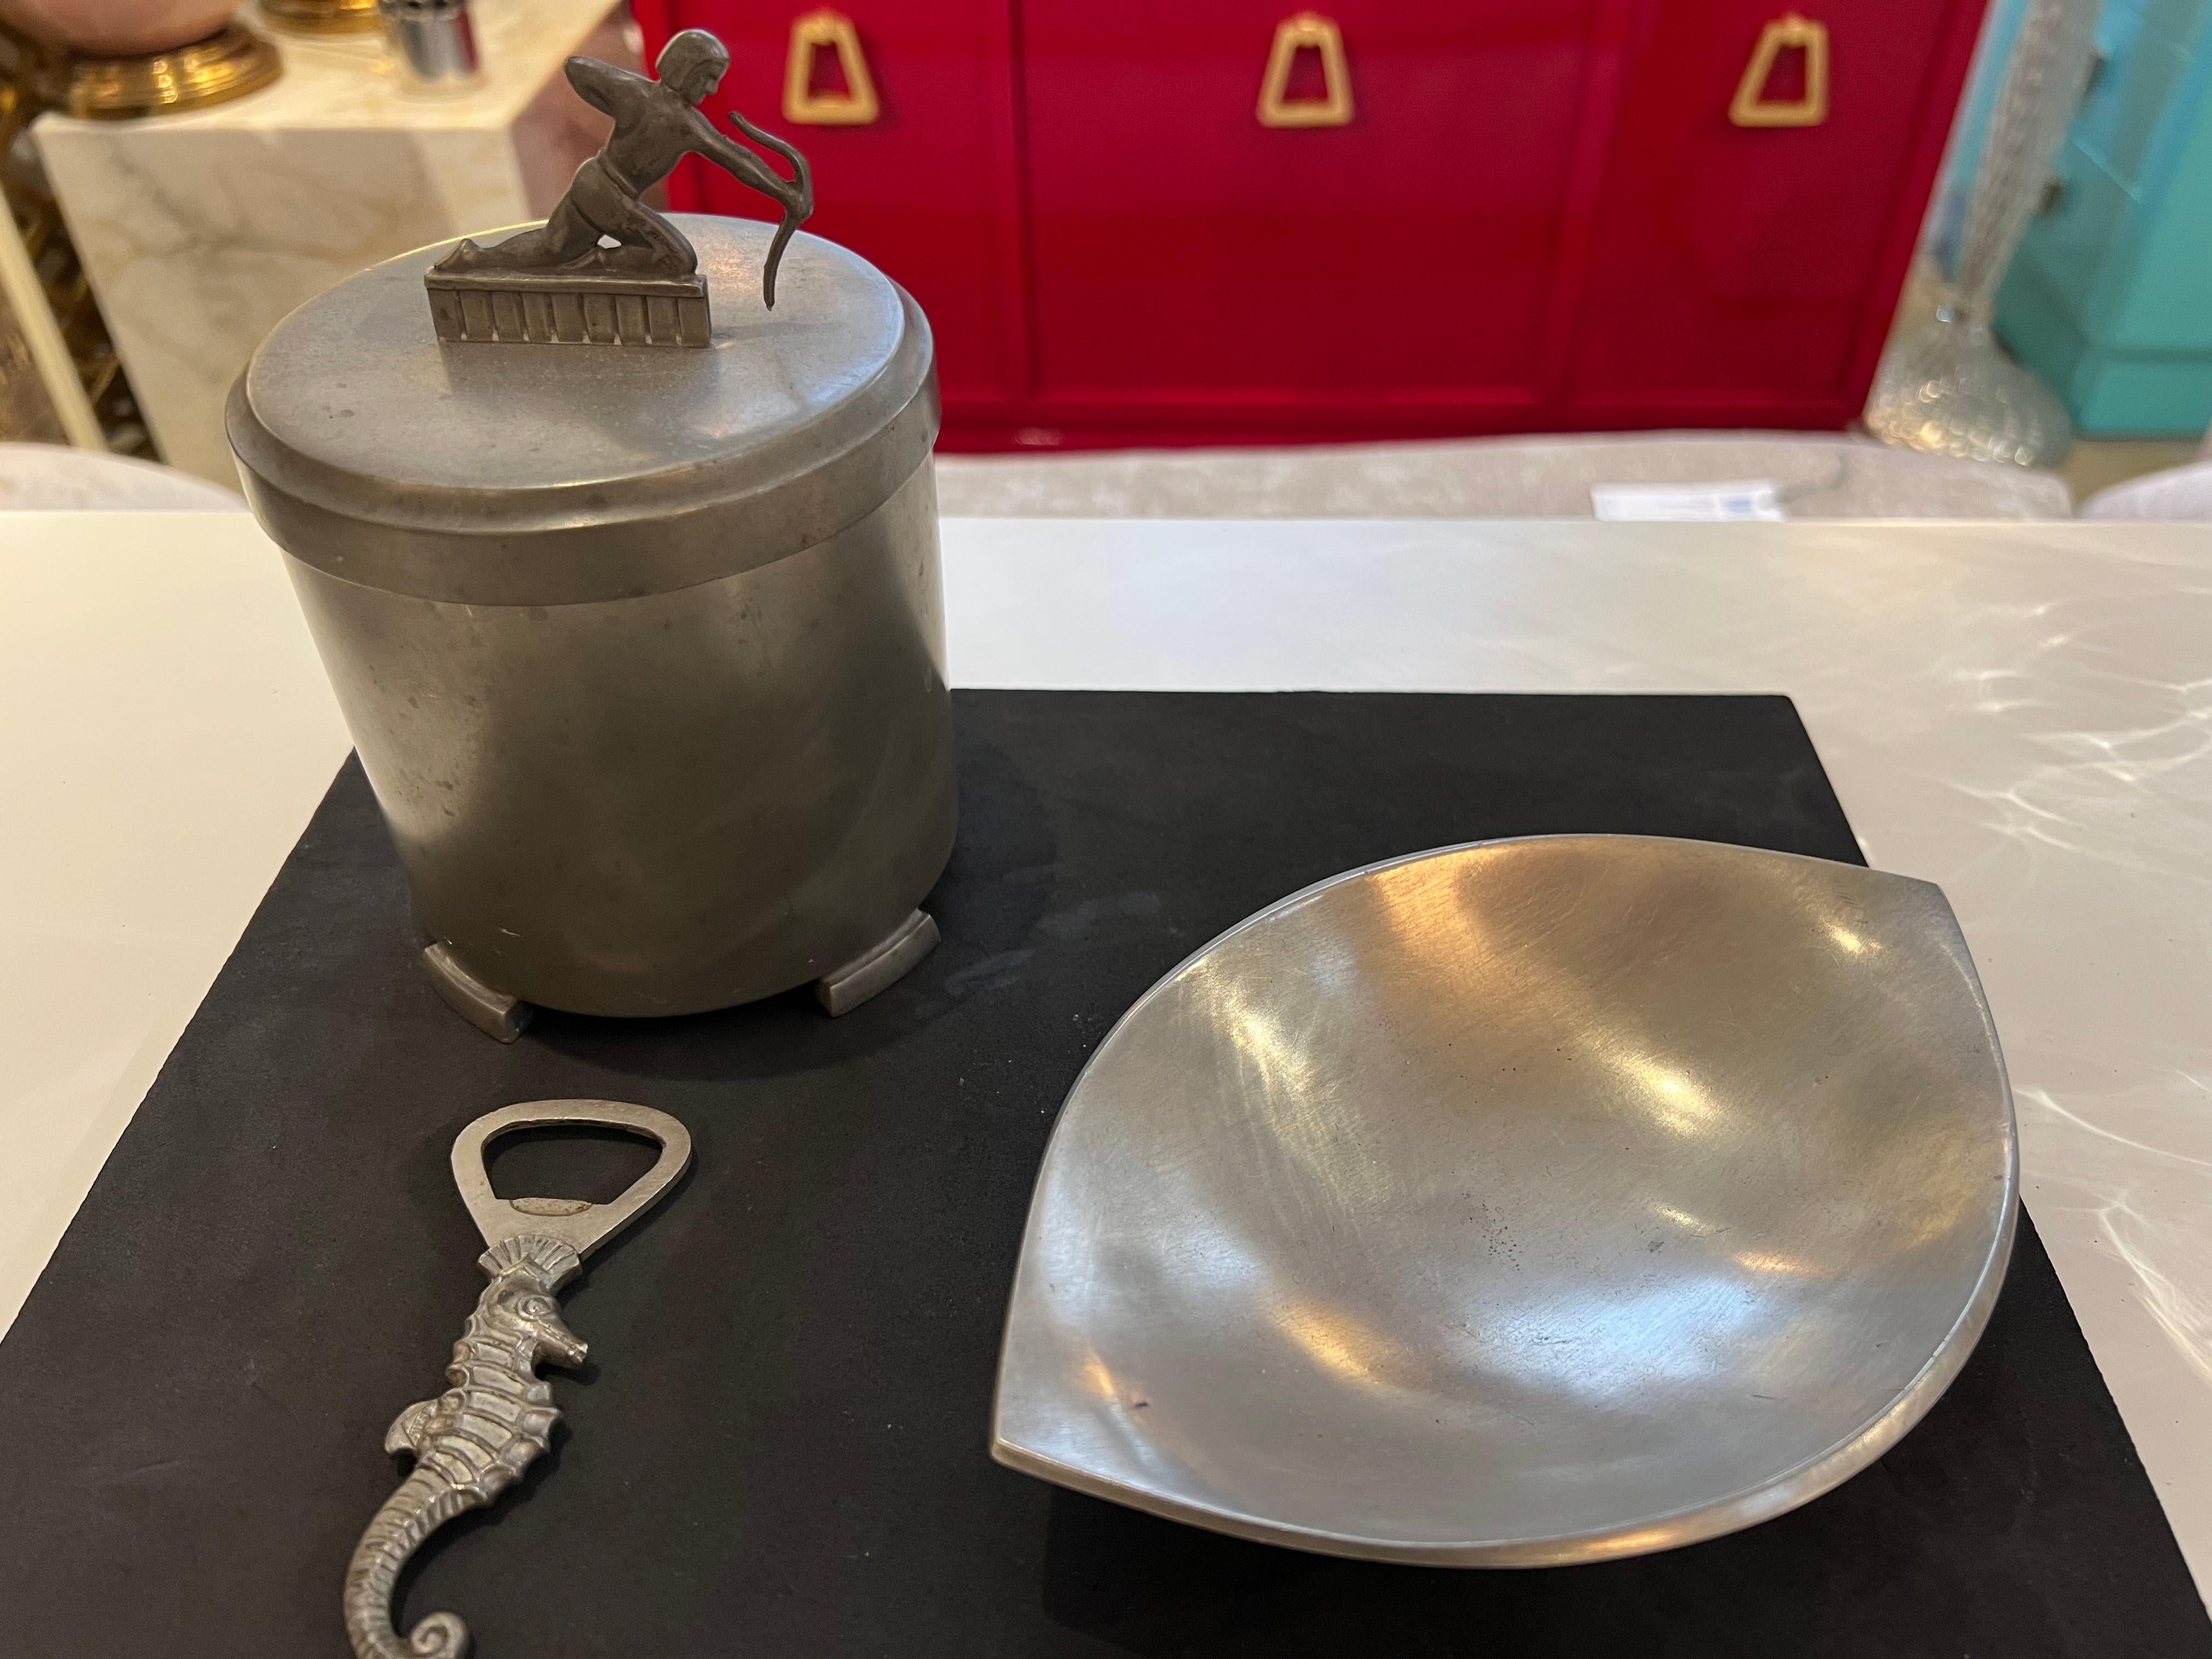 A great set of 3 decorative pewter pieces by Danish maker, Just Andersen. One is a jar canister, can be used in a bathroom to hold cotton or q tips. The lid is decorated with a crouched archer. Another is a dish which can be used for soap. The other